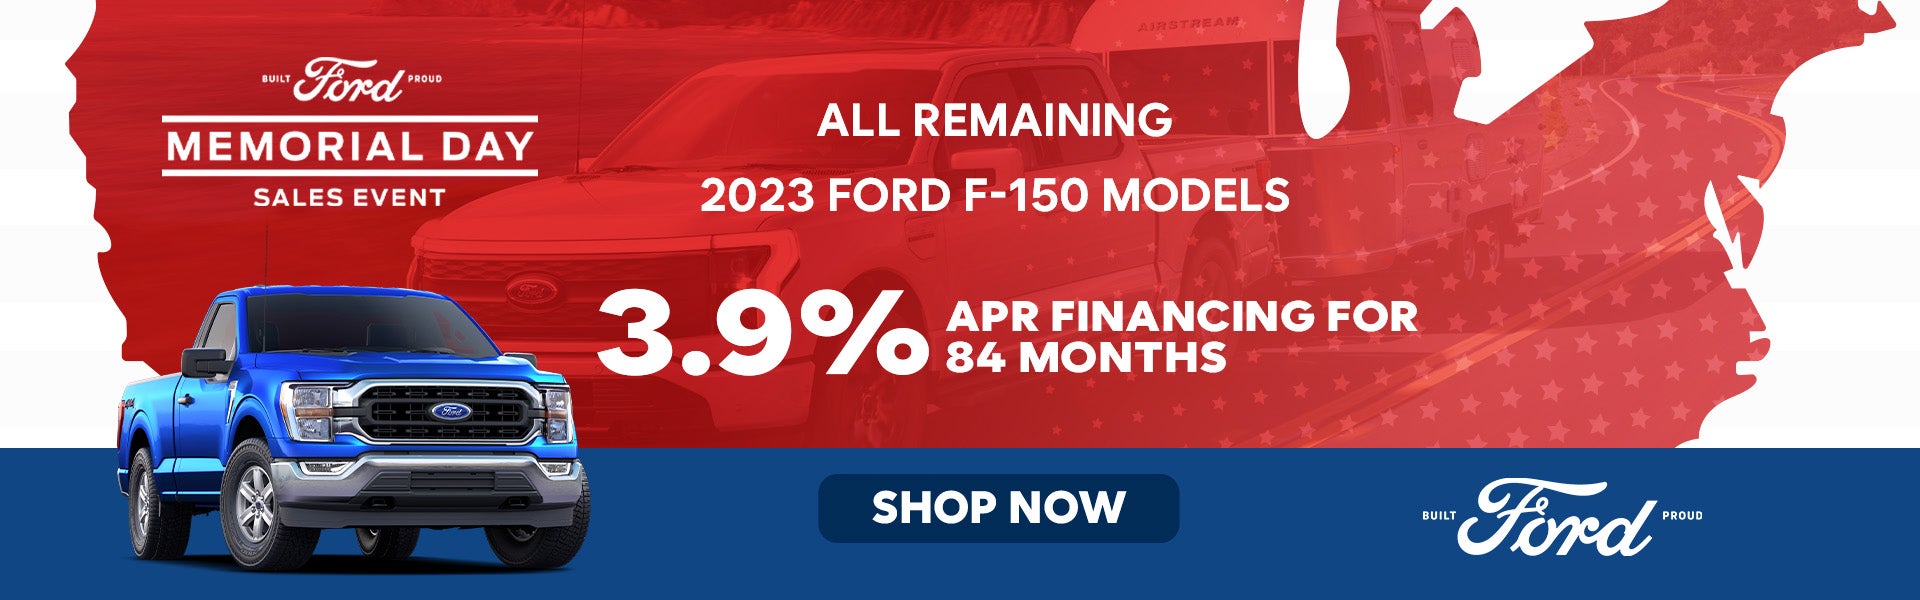 Remaining 2023 Ford F-150s